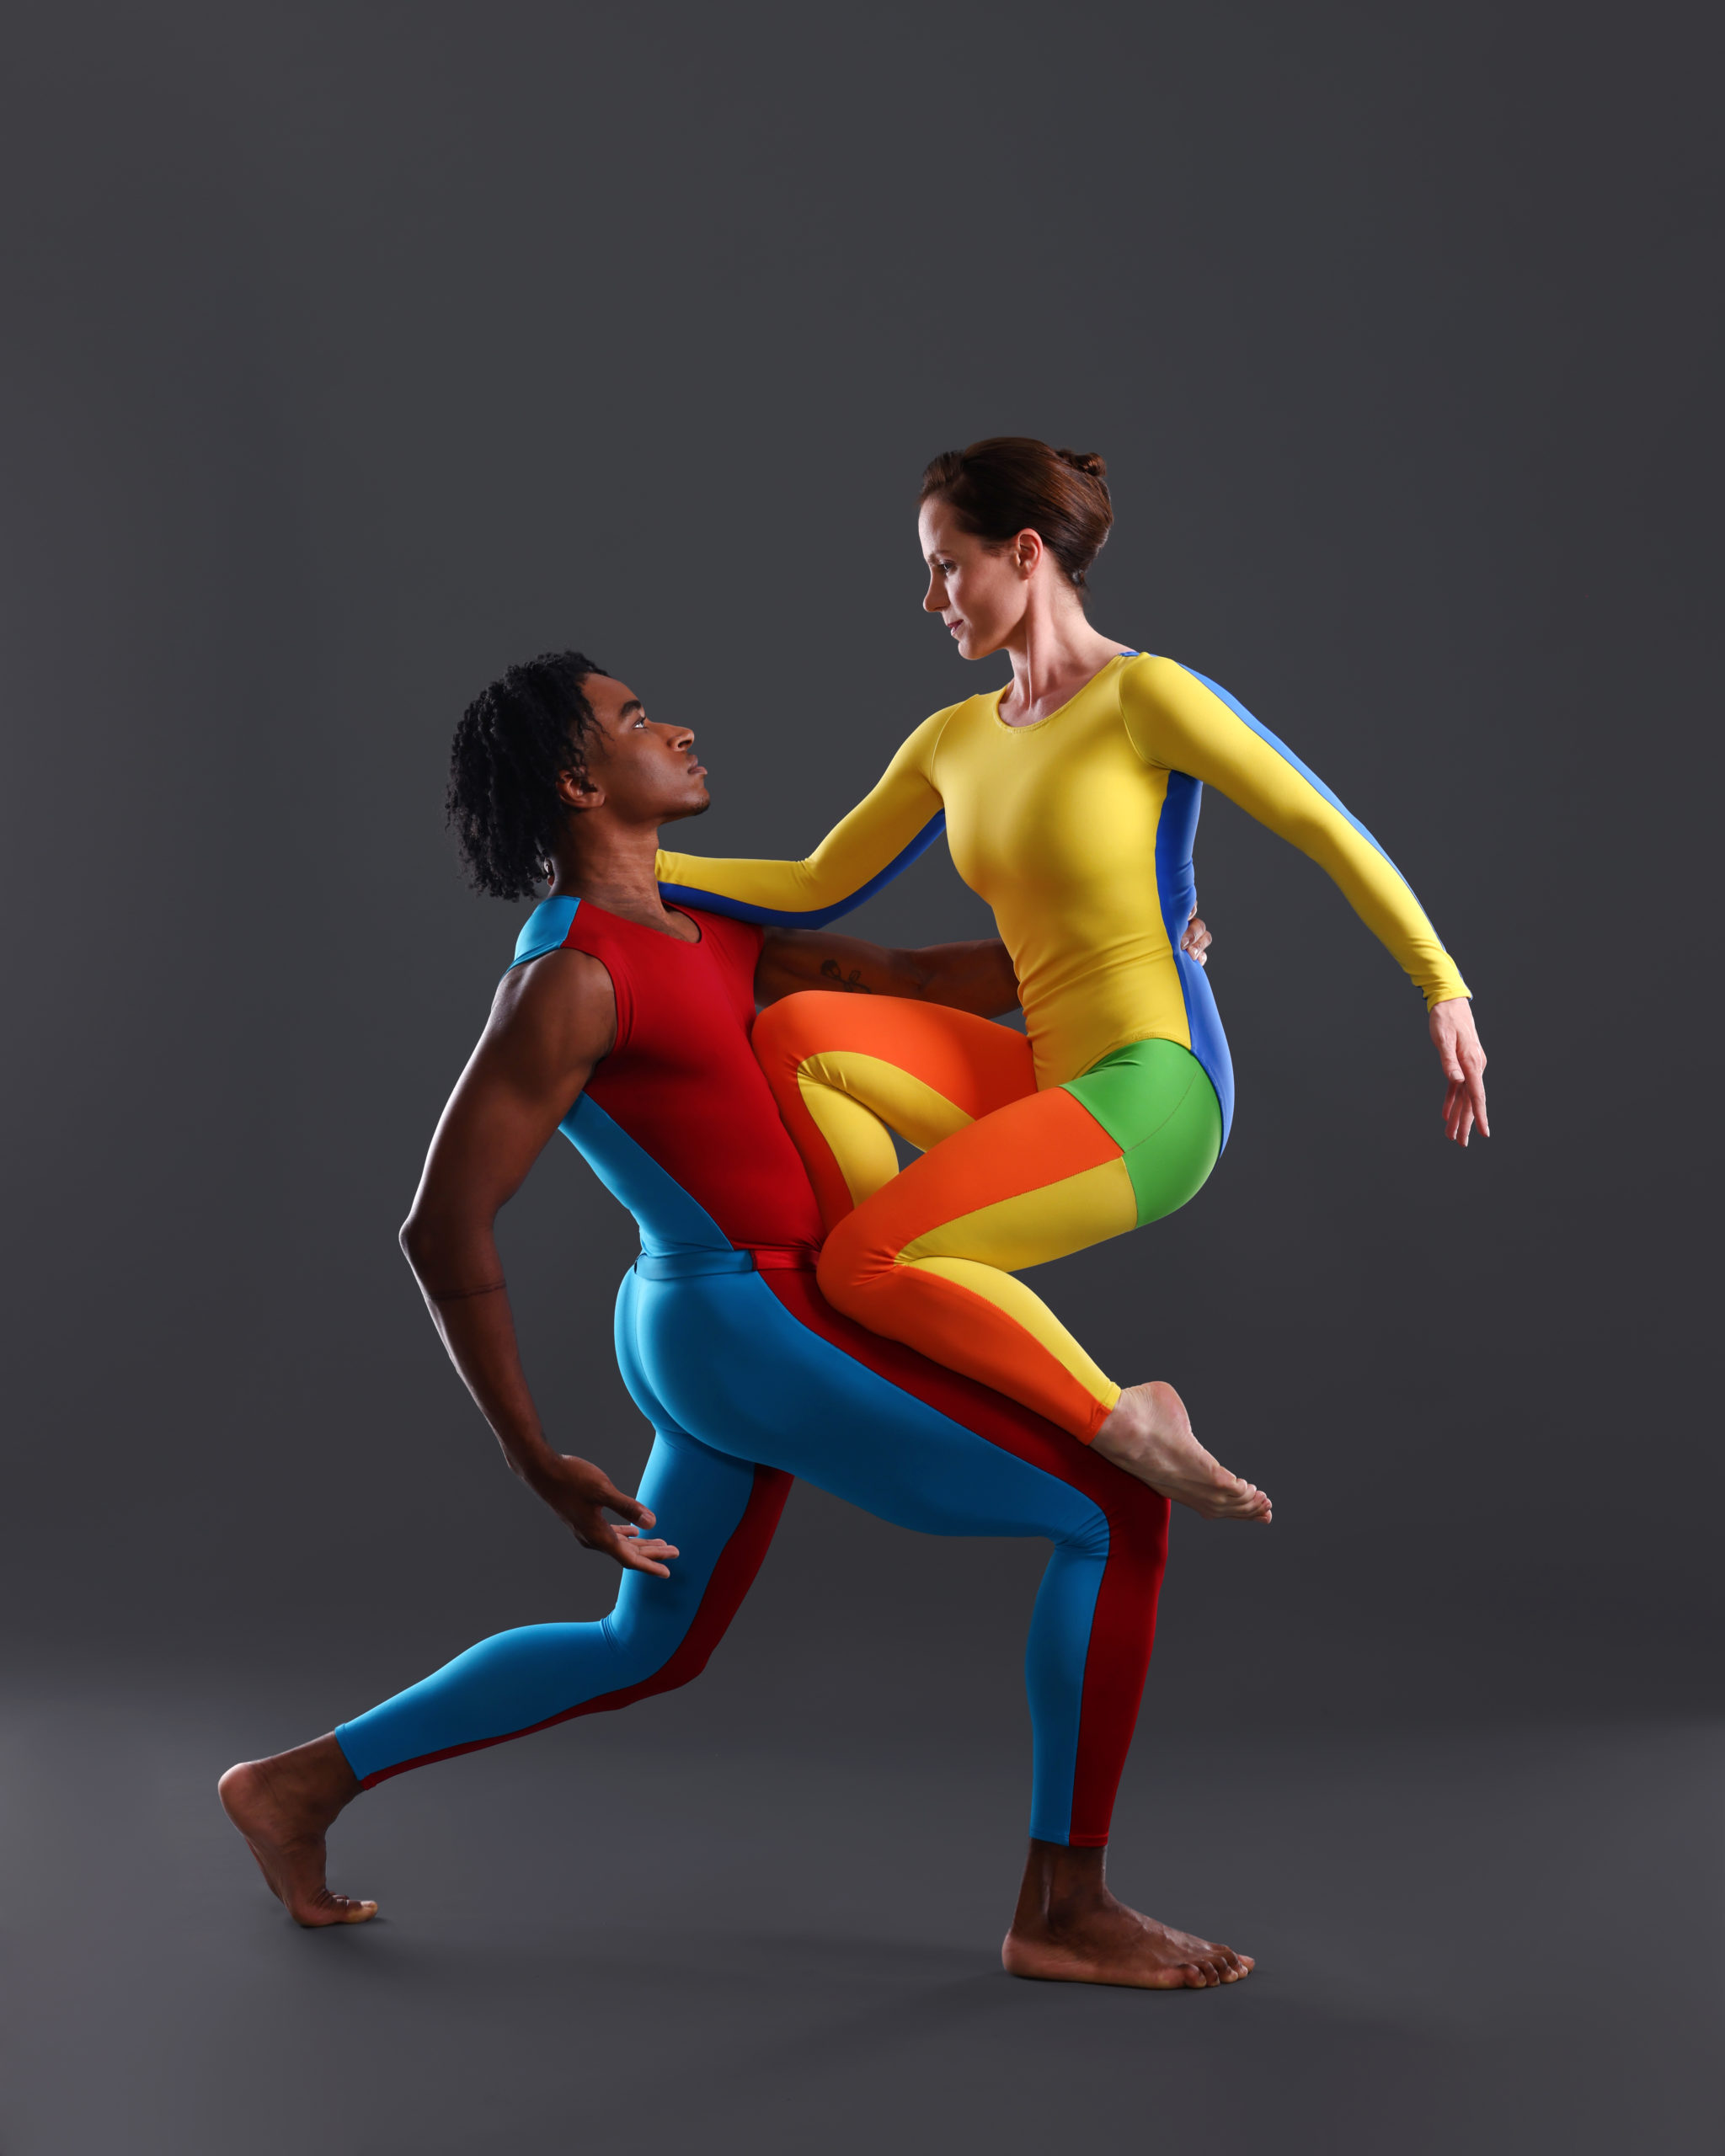 Devon Louis is a black man with chin-length curly hair. Eran Bugge is a fair-skinned woman with long brown hair pulled into a bun. They wear rainbow-colored unitards, and Louis lunges forward on his right leg, supporting Bugge as she kneels on his thigh.